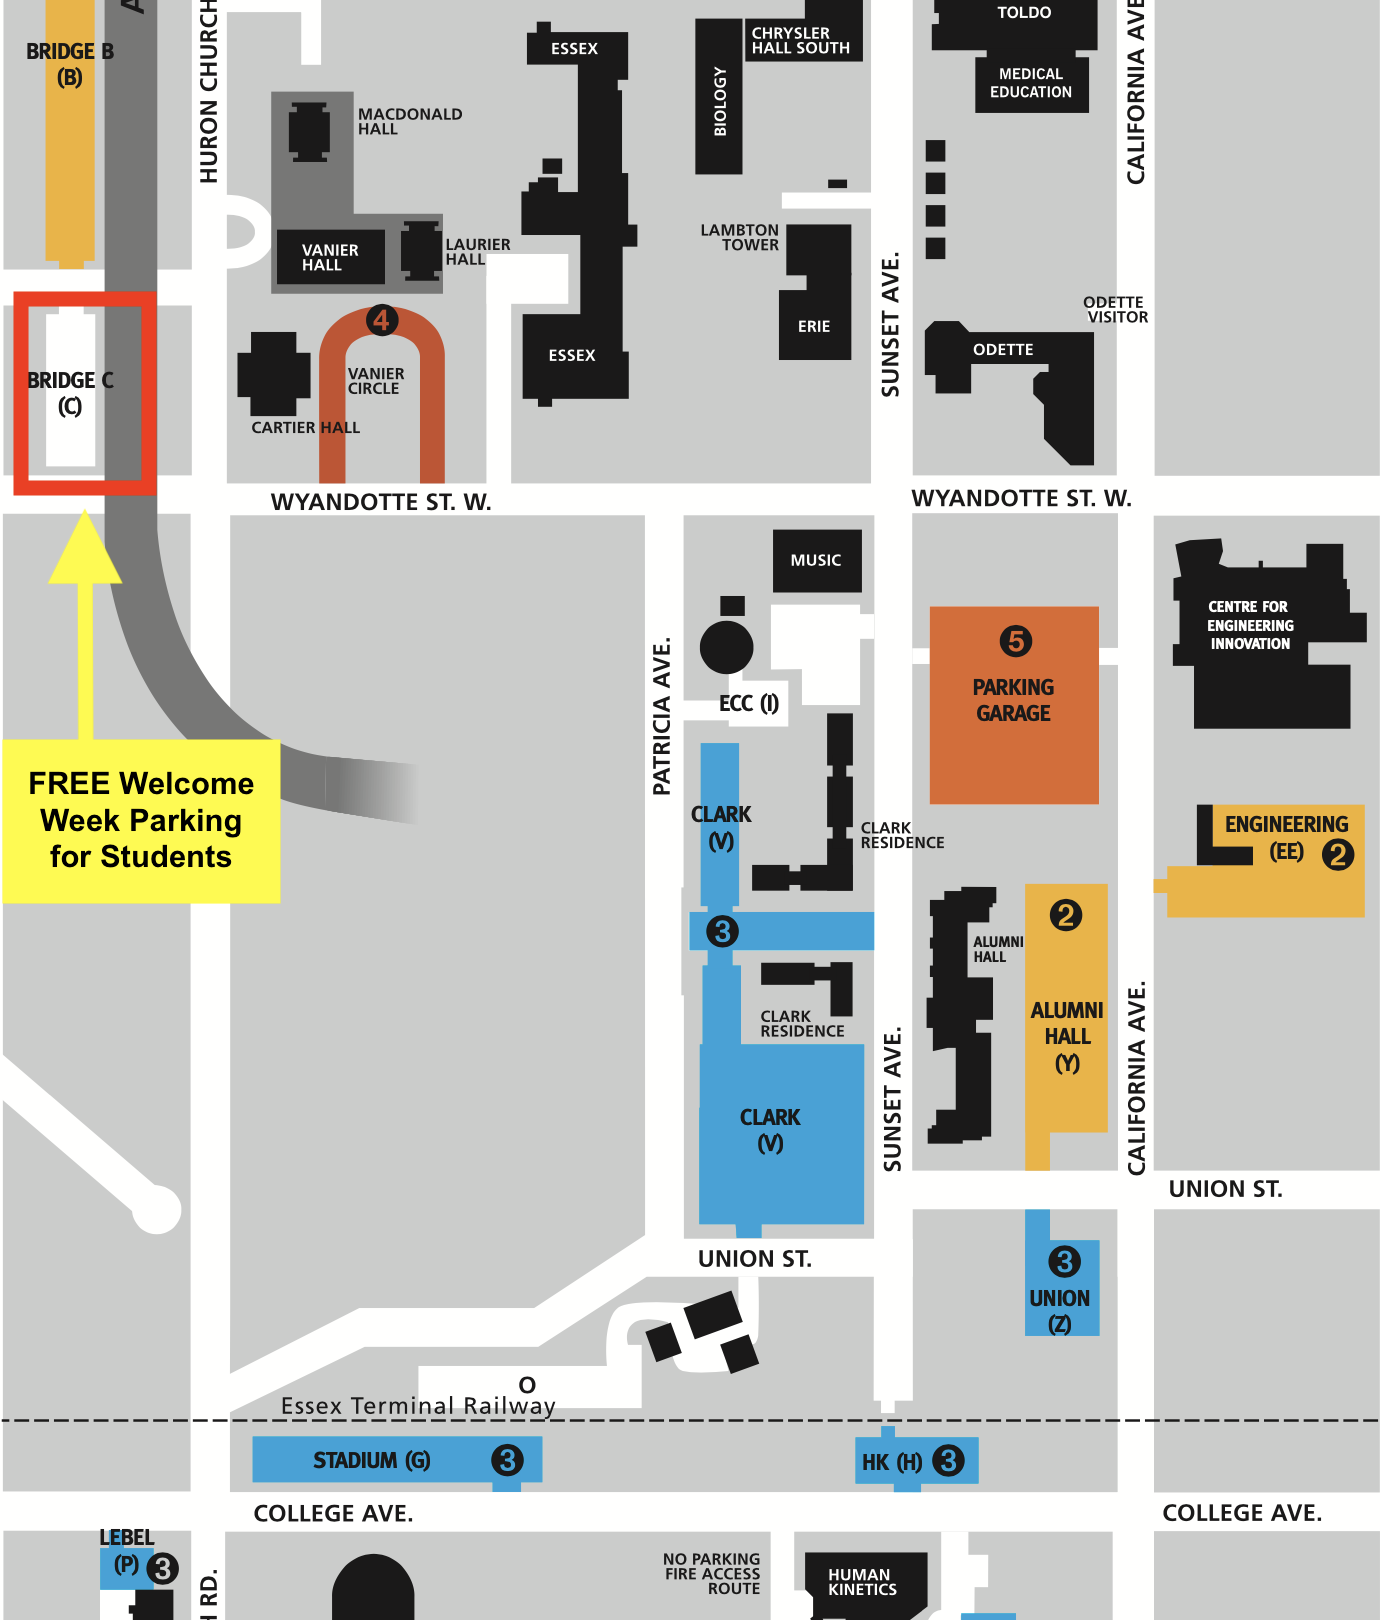 Welcome week parking lot map